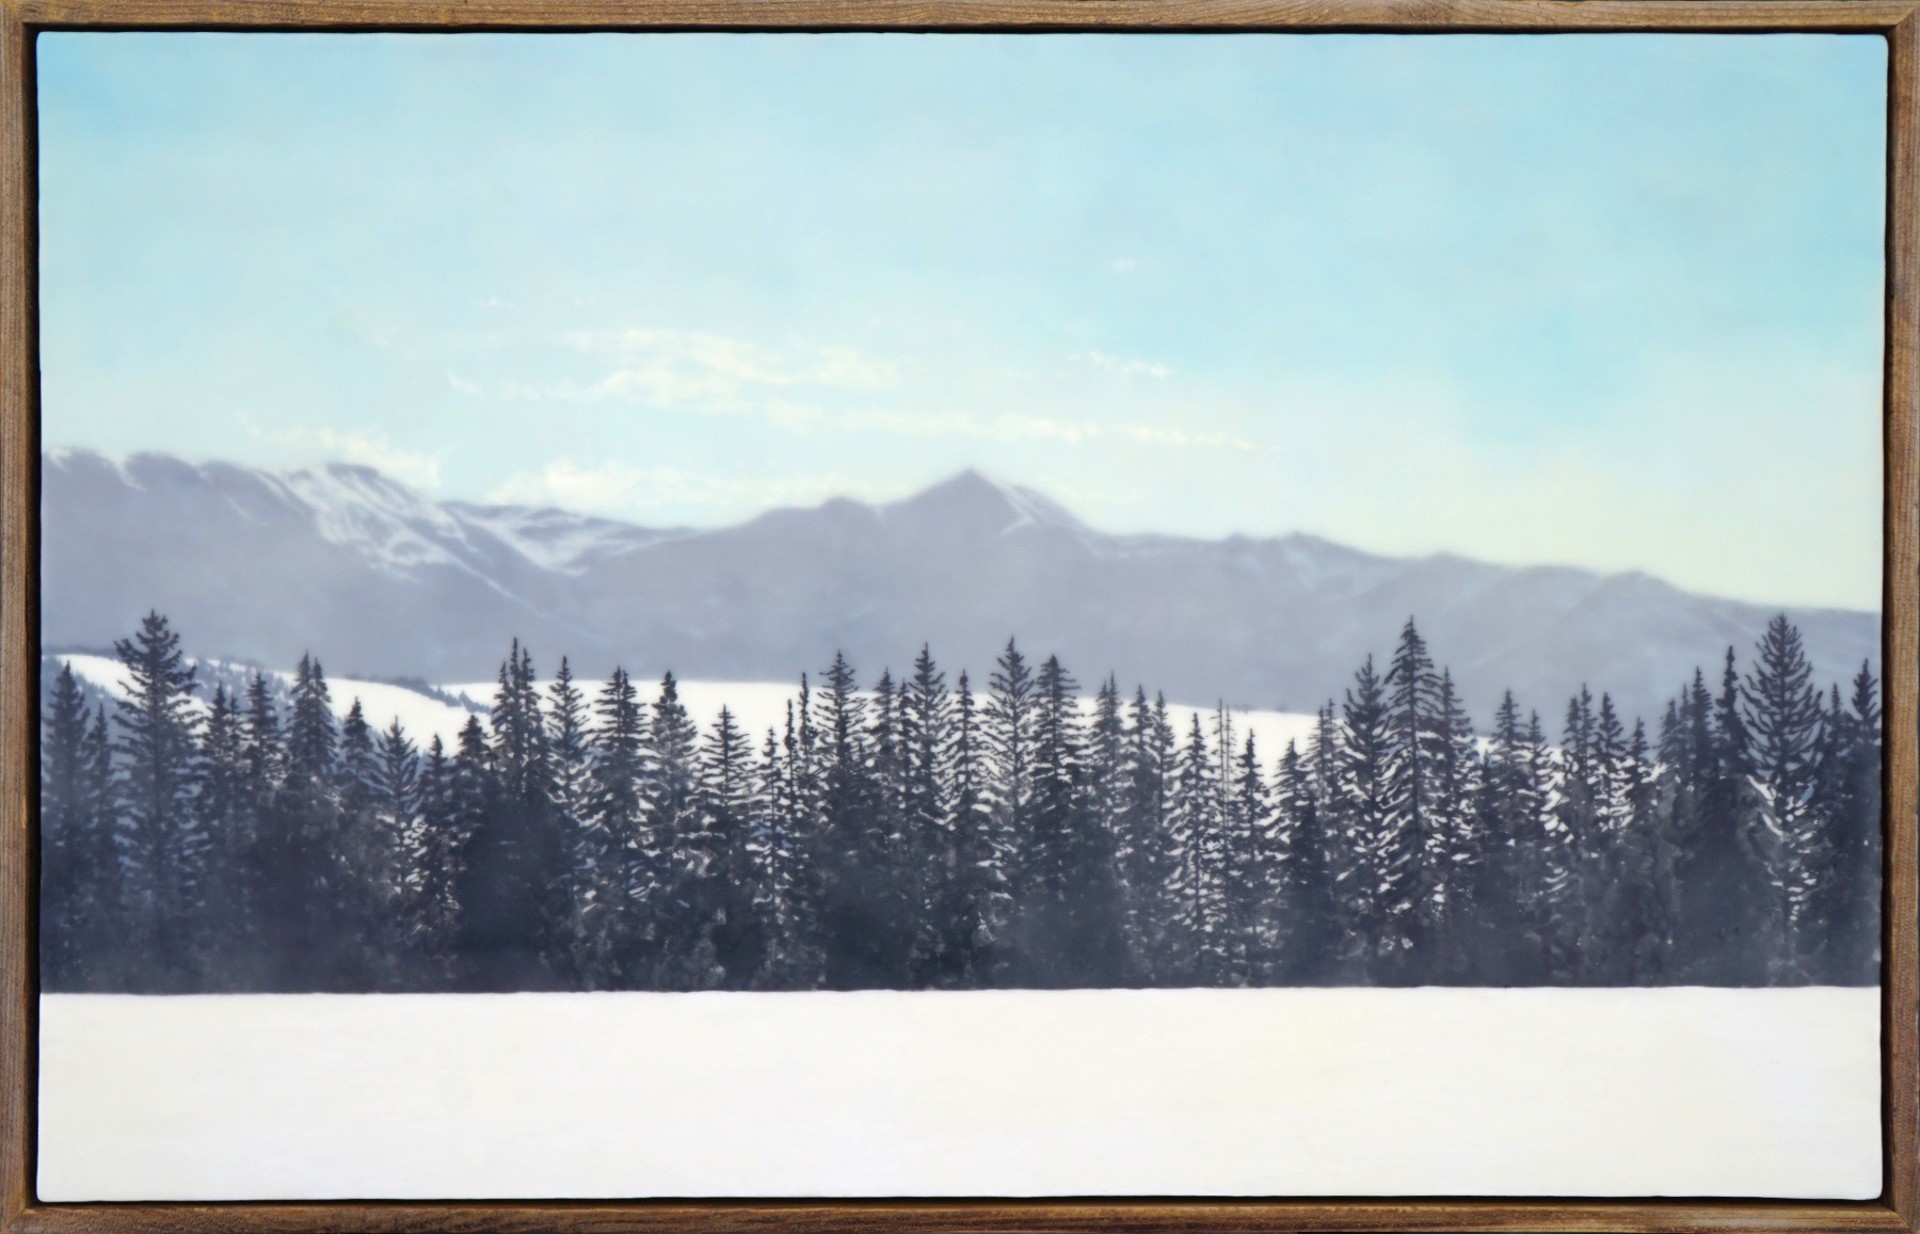 A Landscape Painting Made With Encaustic And Milk Paint Of Pine Trees And Mountains In The Distance By Bridgette Meinhold